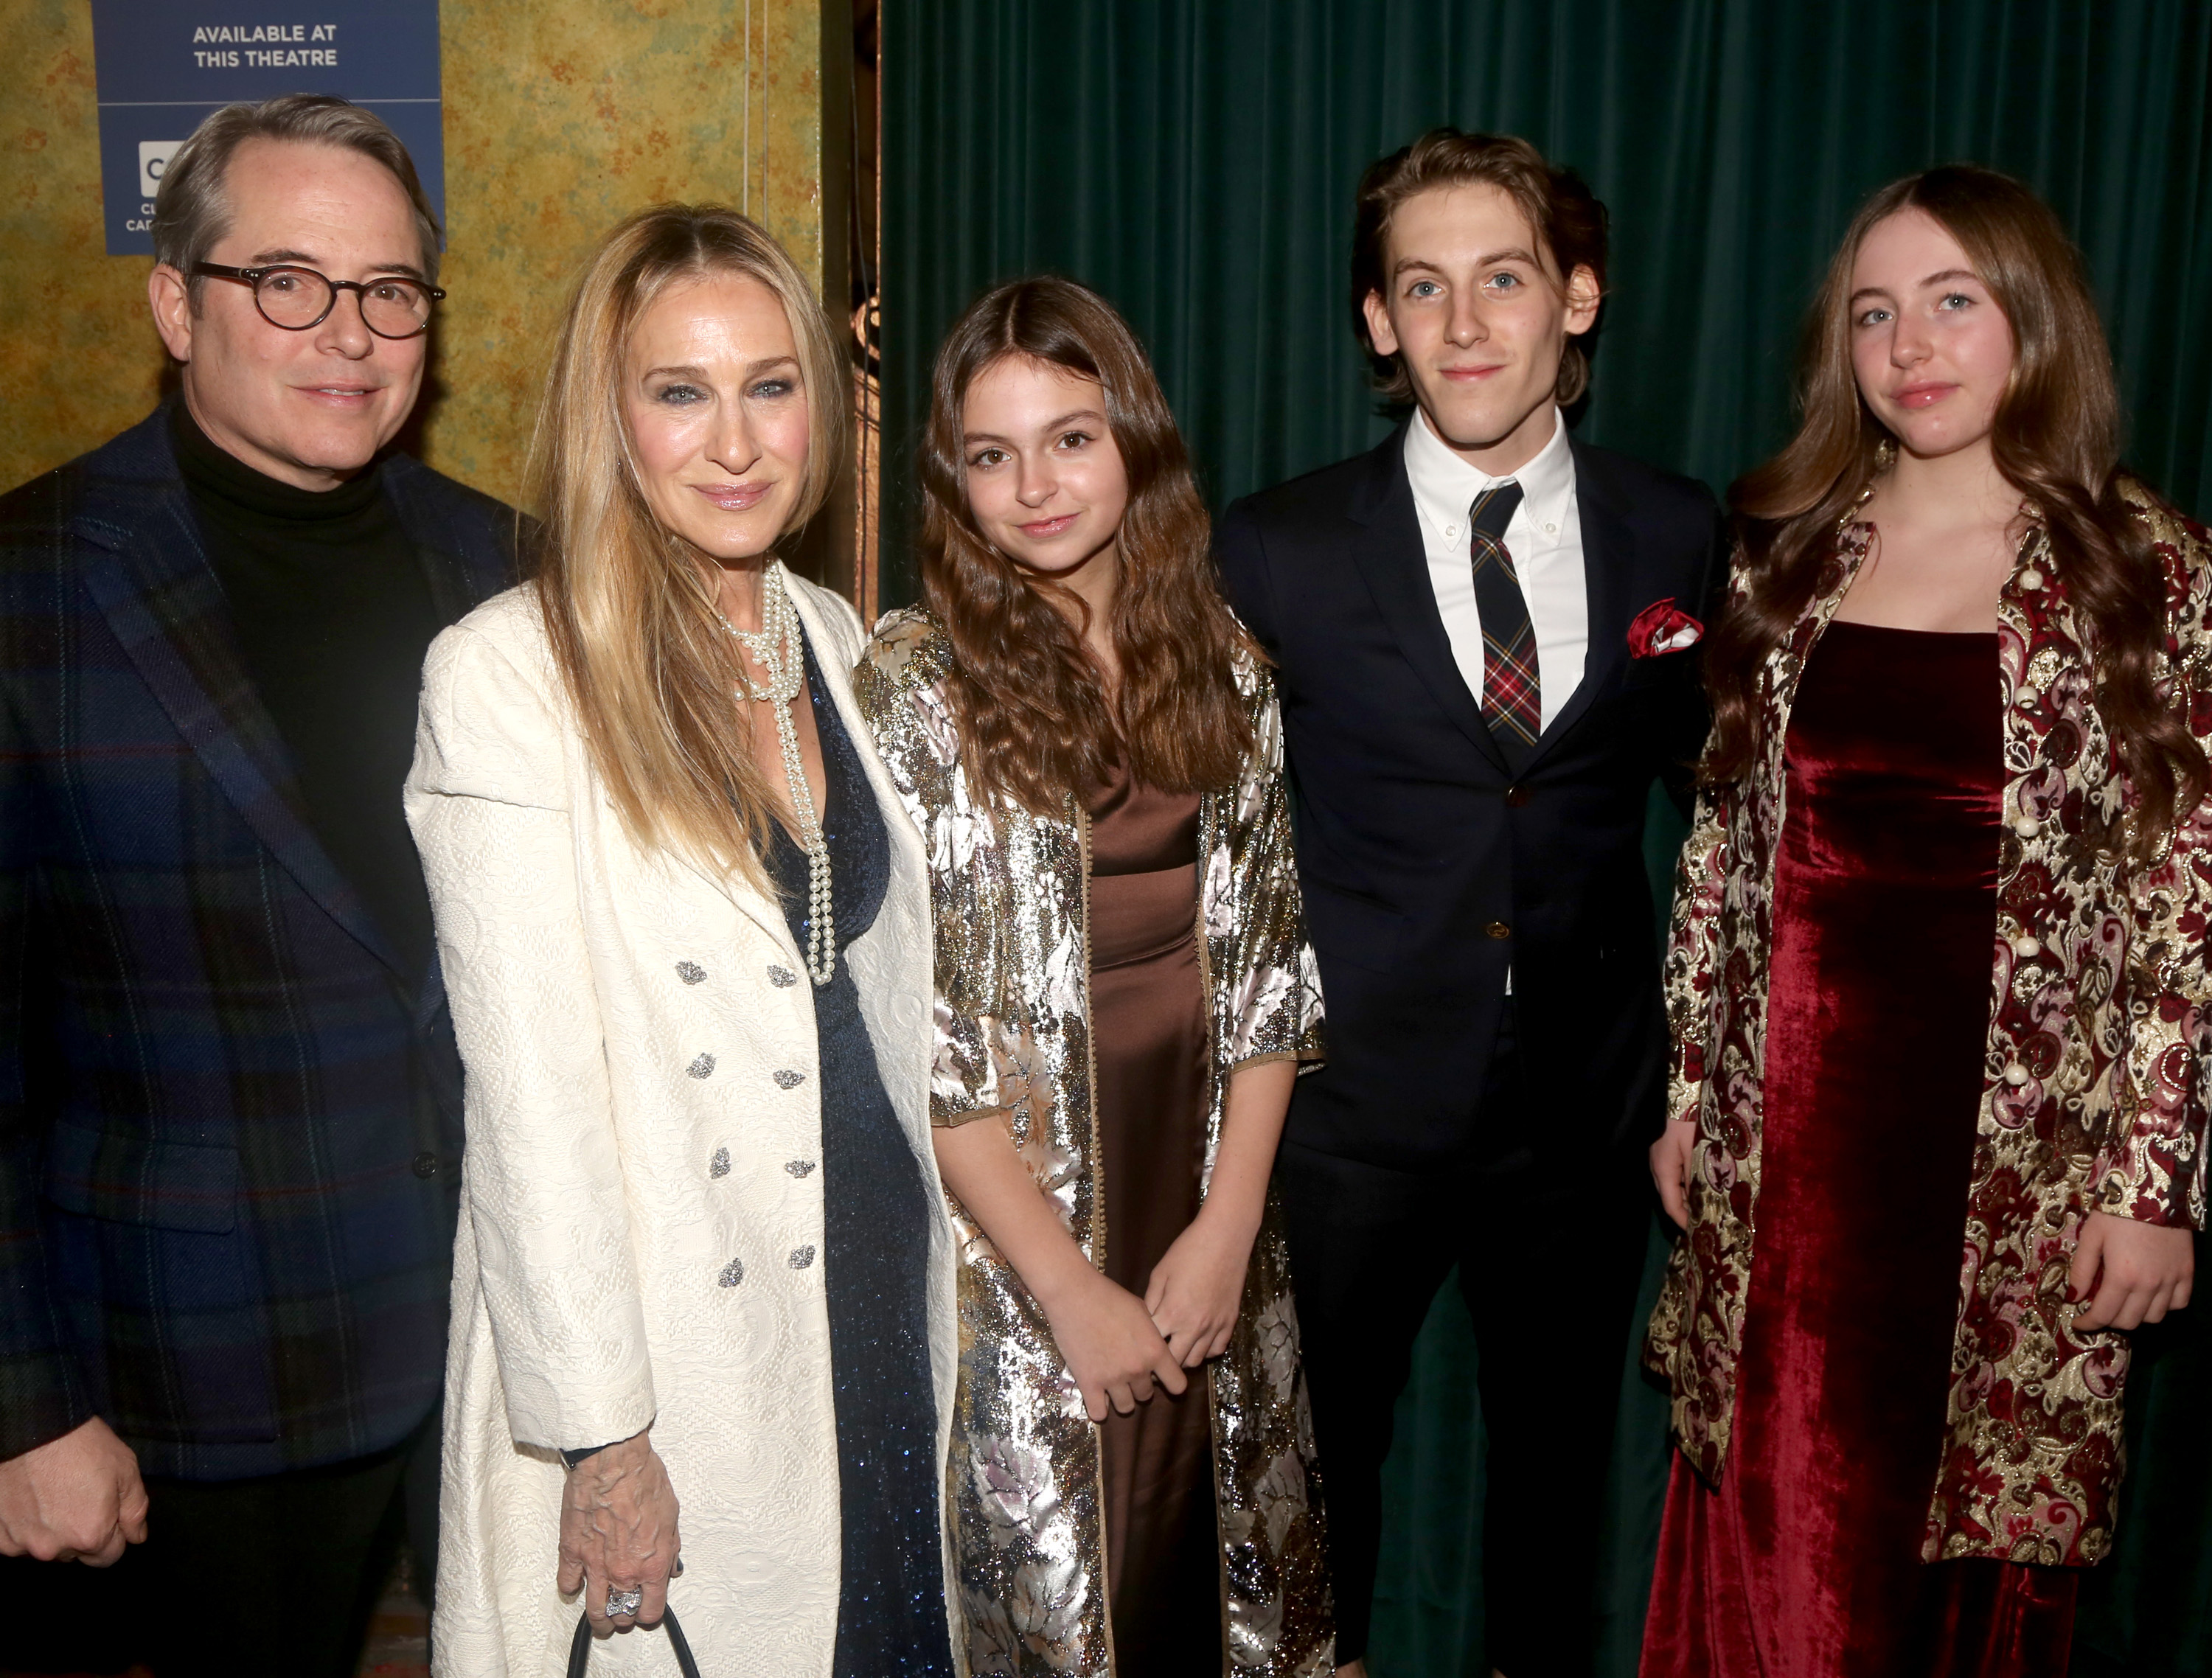 Matthew Broderick, Sarah Jessica Parker, Tabitha Hodge Broderick, James Wilkie Broderick, and Marion Loretta Elwell Broderick in New York City on December 11, 2022 | Source: Getty Images